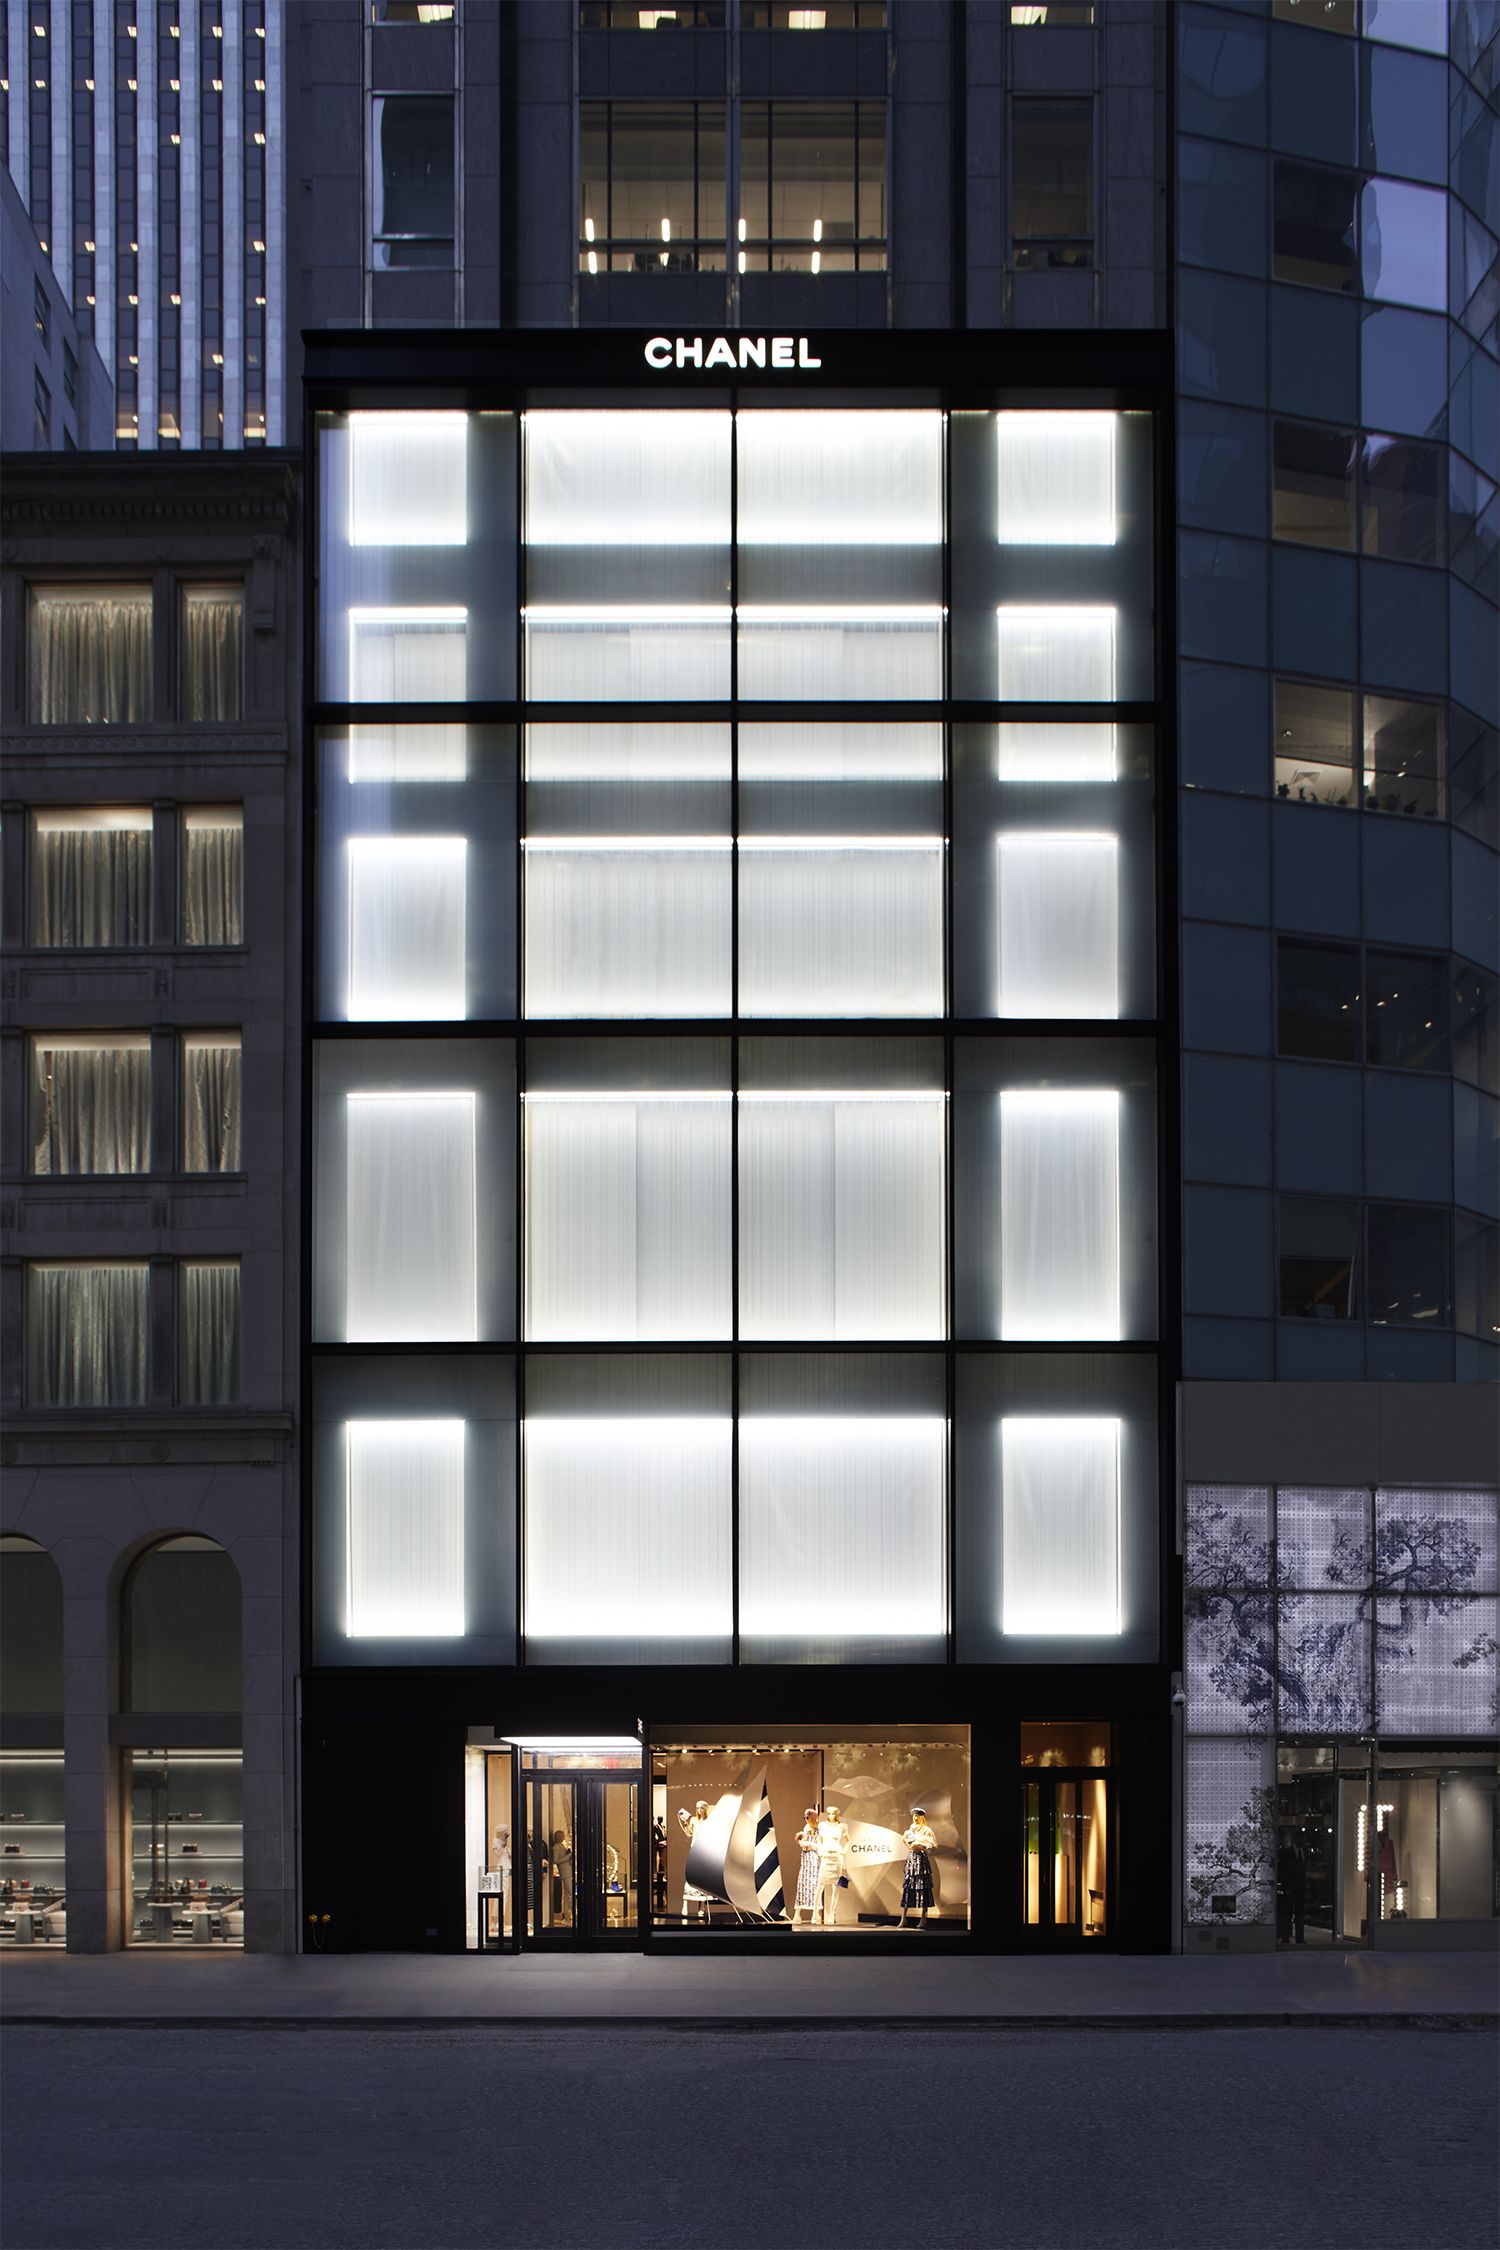 New Chanel 57th Street Boutique - Architect Peter Marino Believes